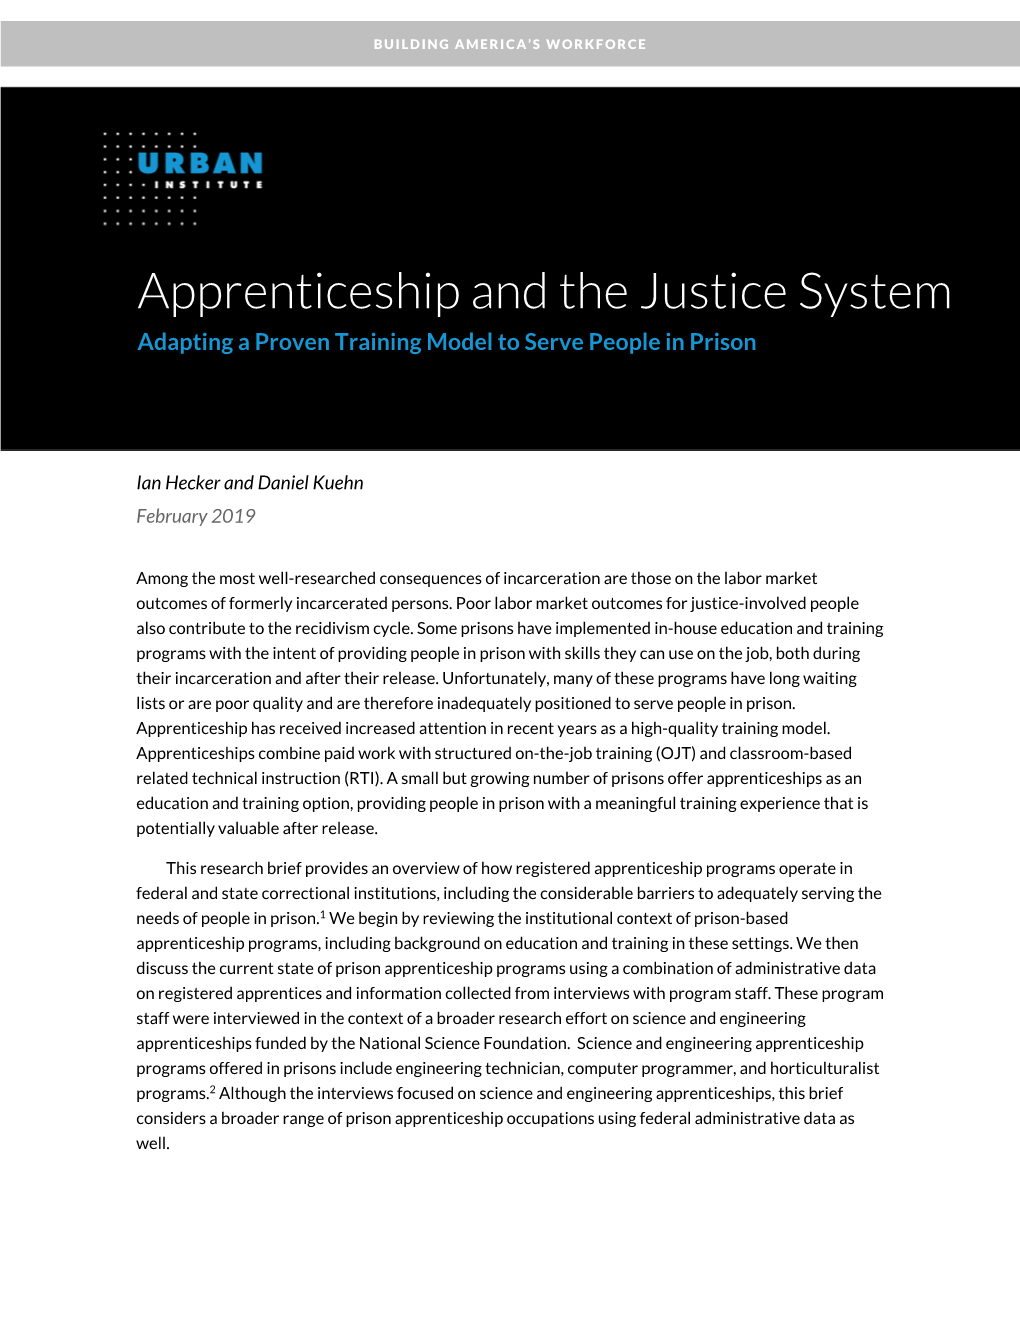 Apprenticeship and the Justice System Adapting a Proven Training Model to Serve People in Prison